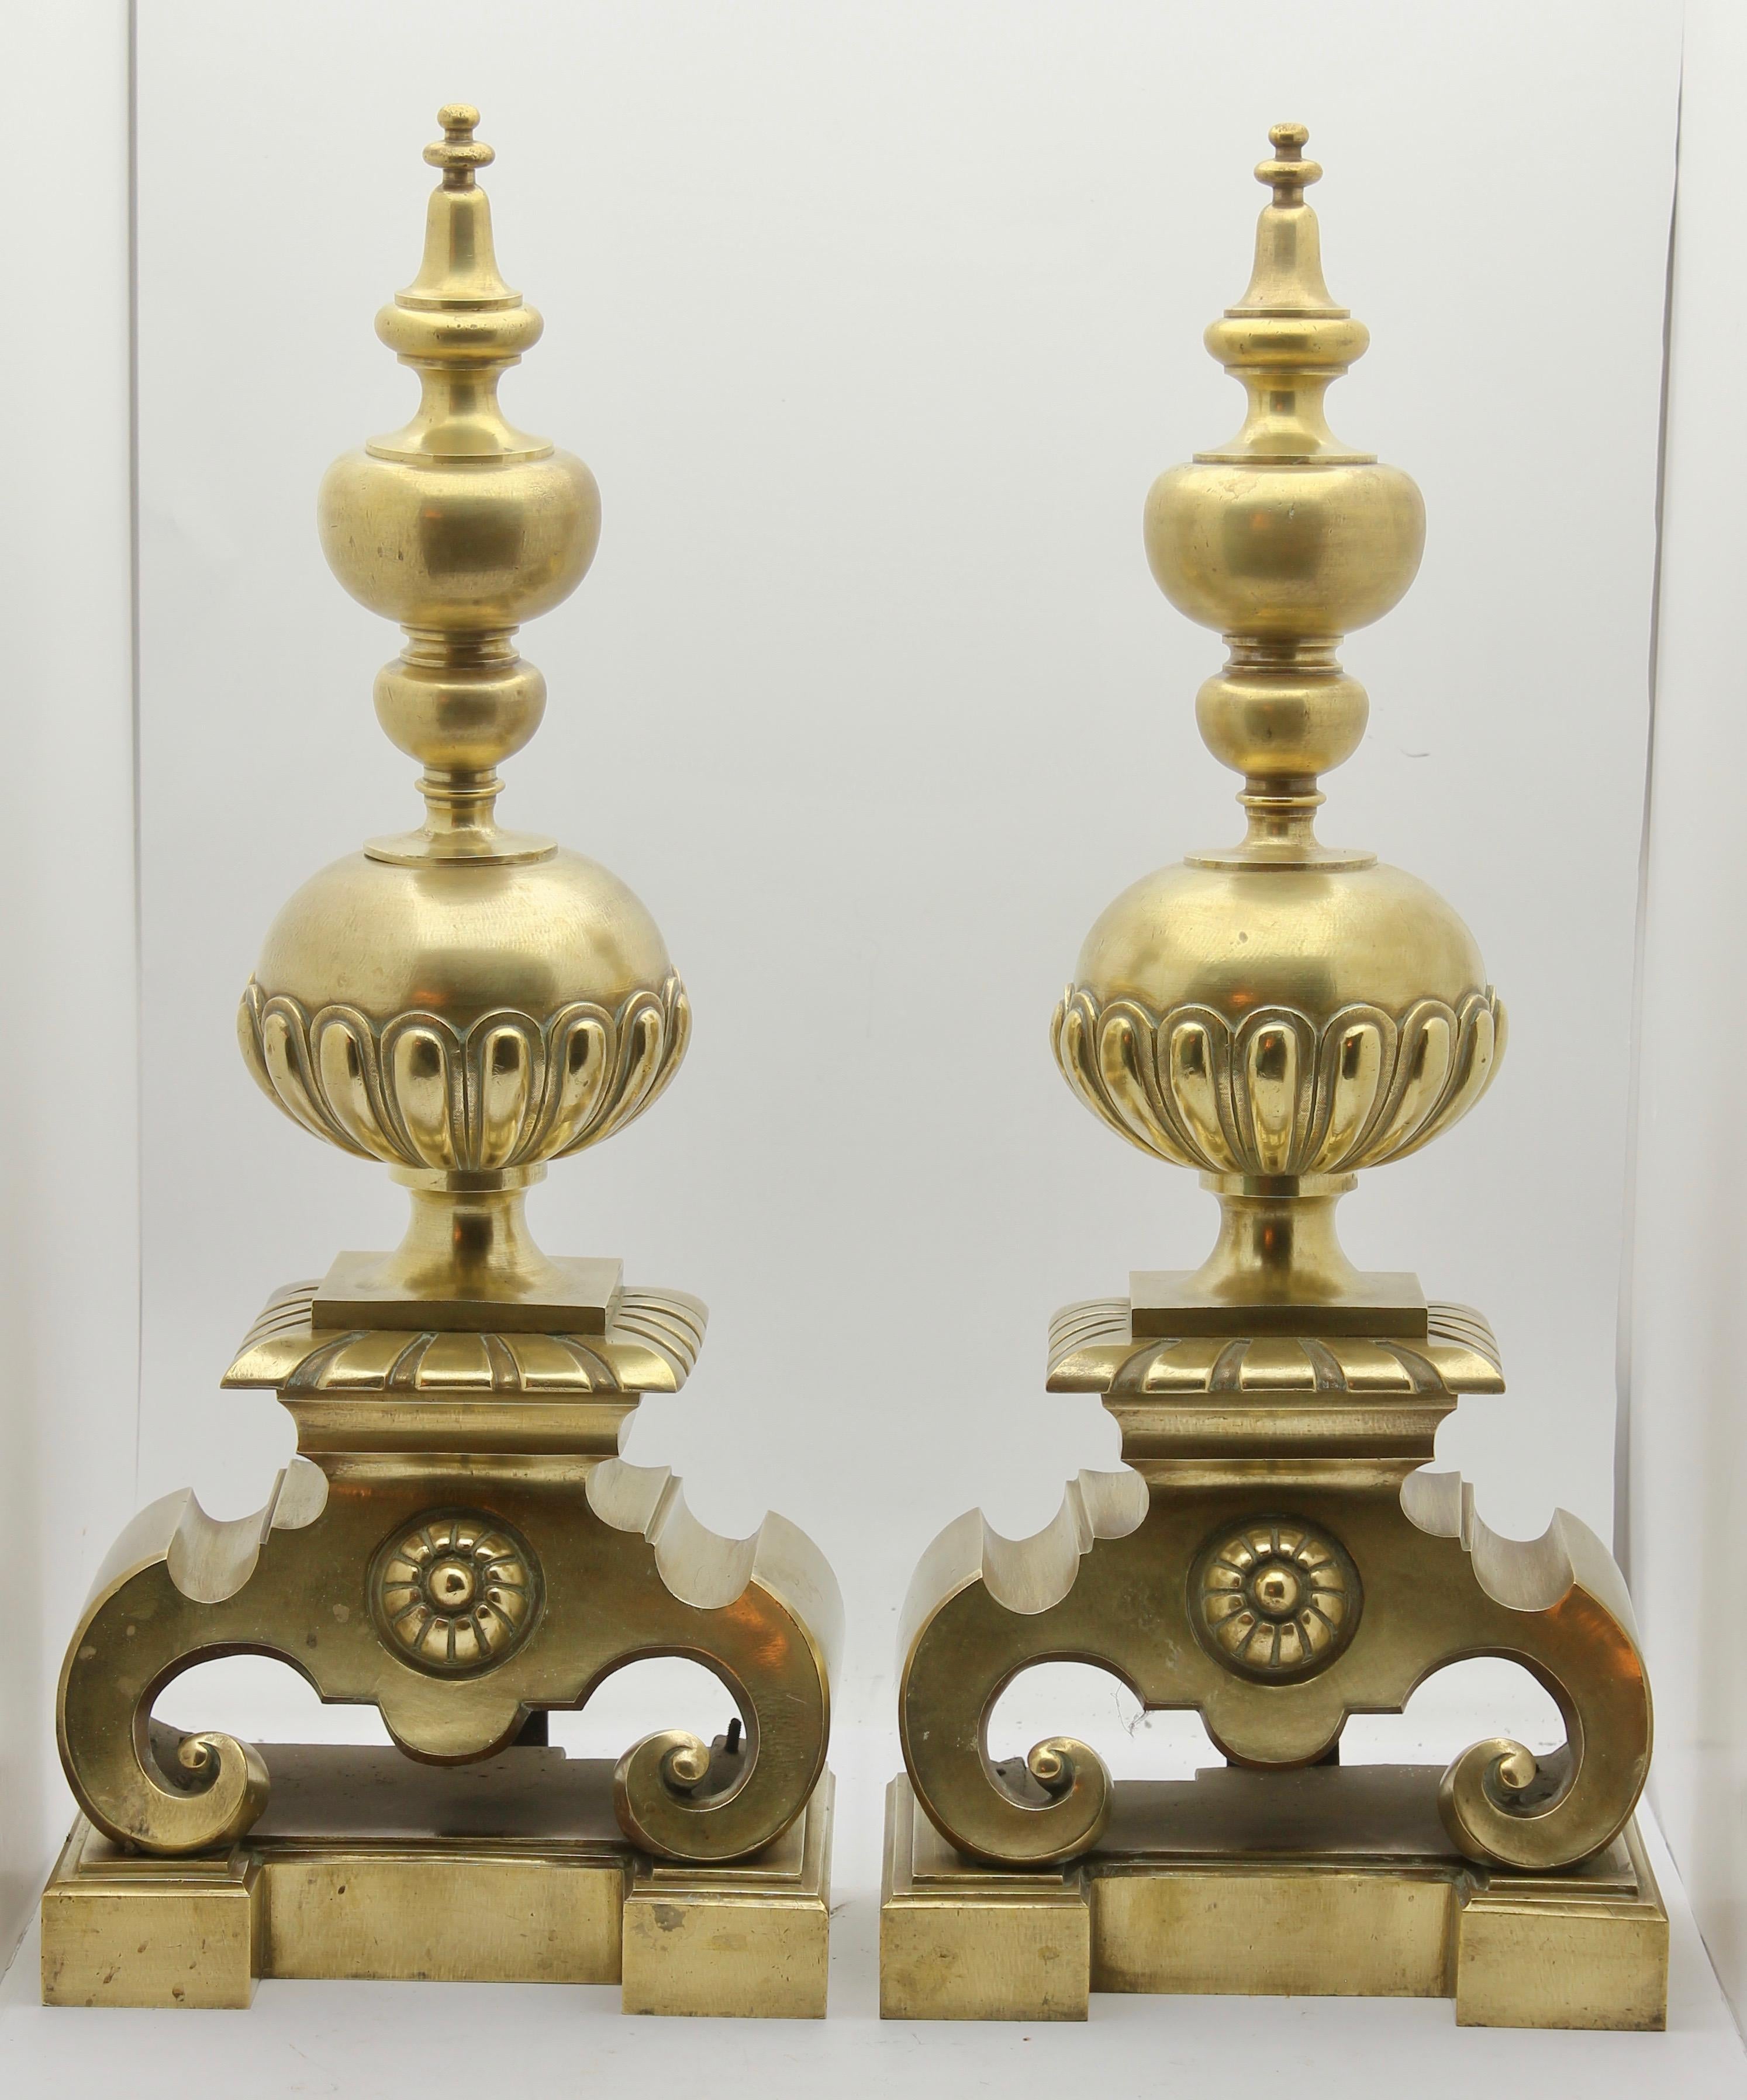 Sometimes referred to as 'fire dogs', these heavy brass andirons can be simply attached to a fire basket of hearth furniture, giving that classical country-home look.
The scrolled foot on the base supports a half-gadrooned ball and finial. The back